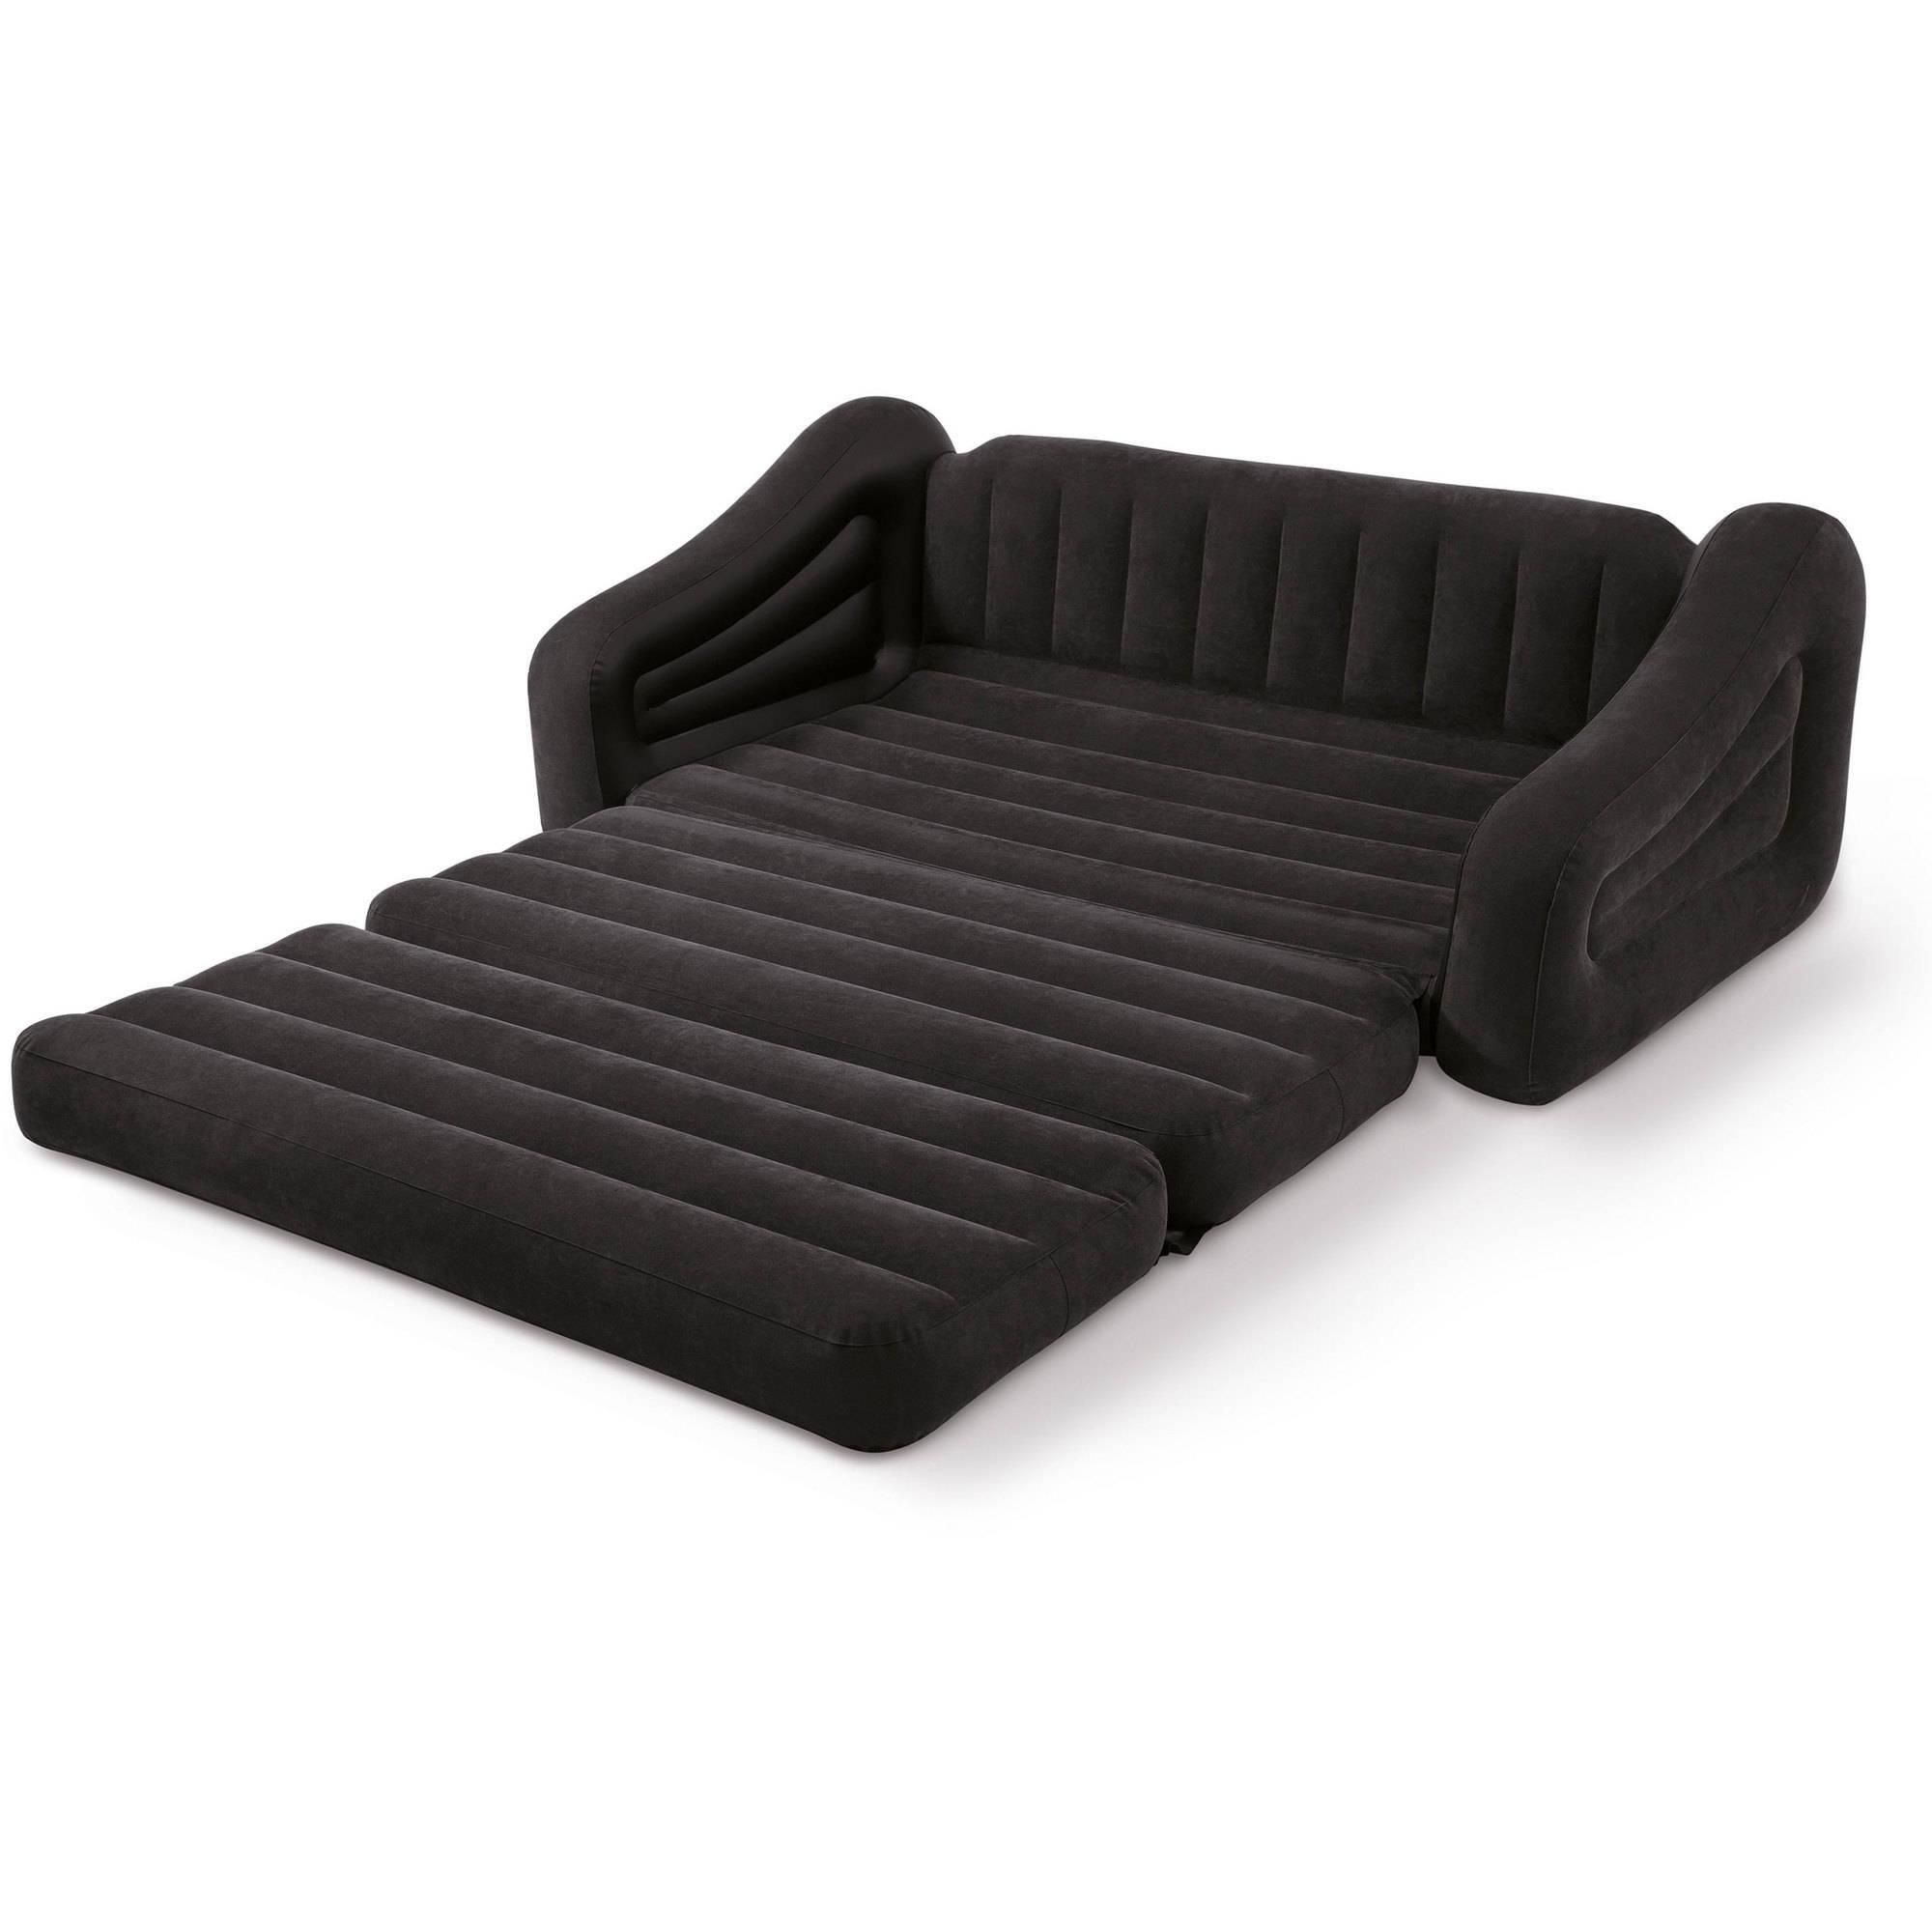 Intex Queen Inflatable Pull Out Sofa Bed – Walmart In Inflatable Pull Out Sofas (View 2 of 20)